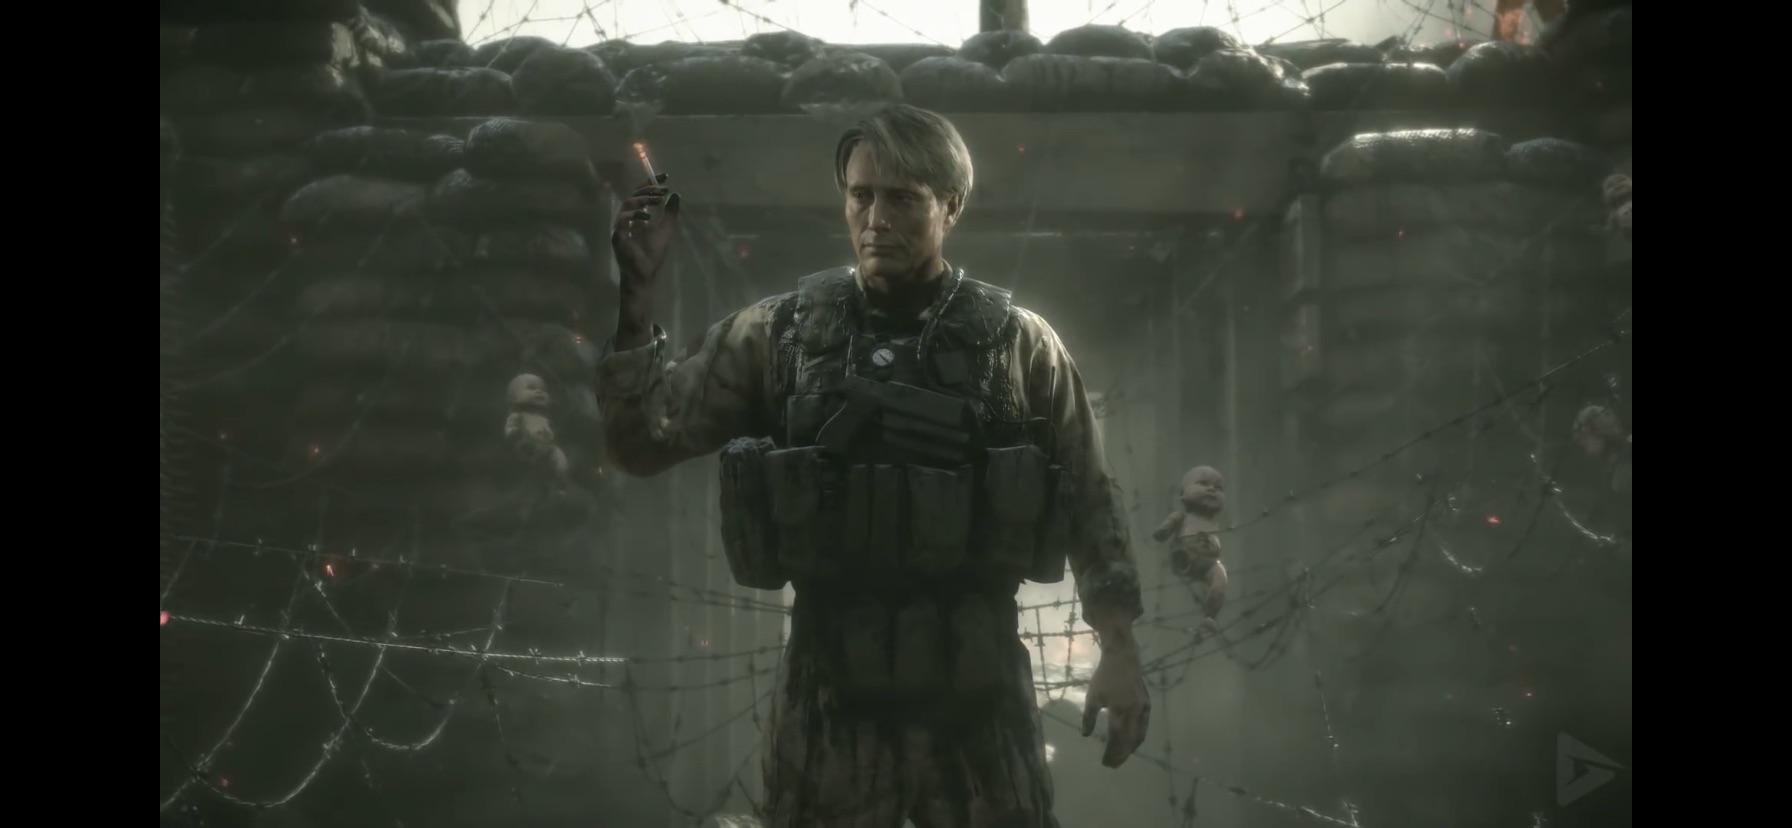 Would love to see someone cosplay as Clifford Unger from Death Stranding with the bandolier glitches we have